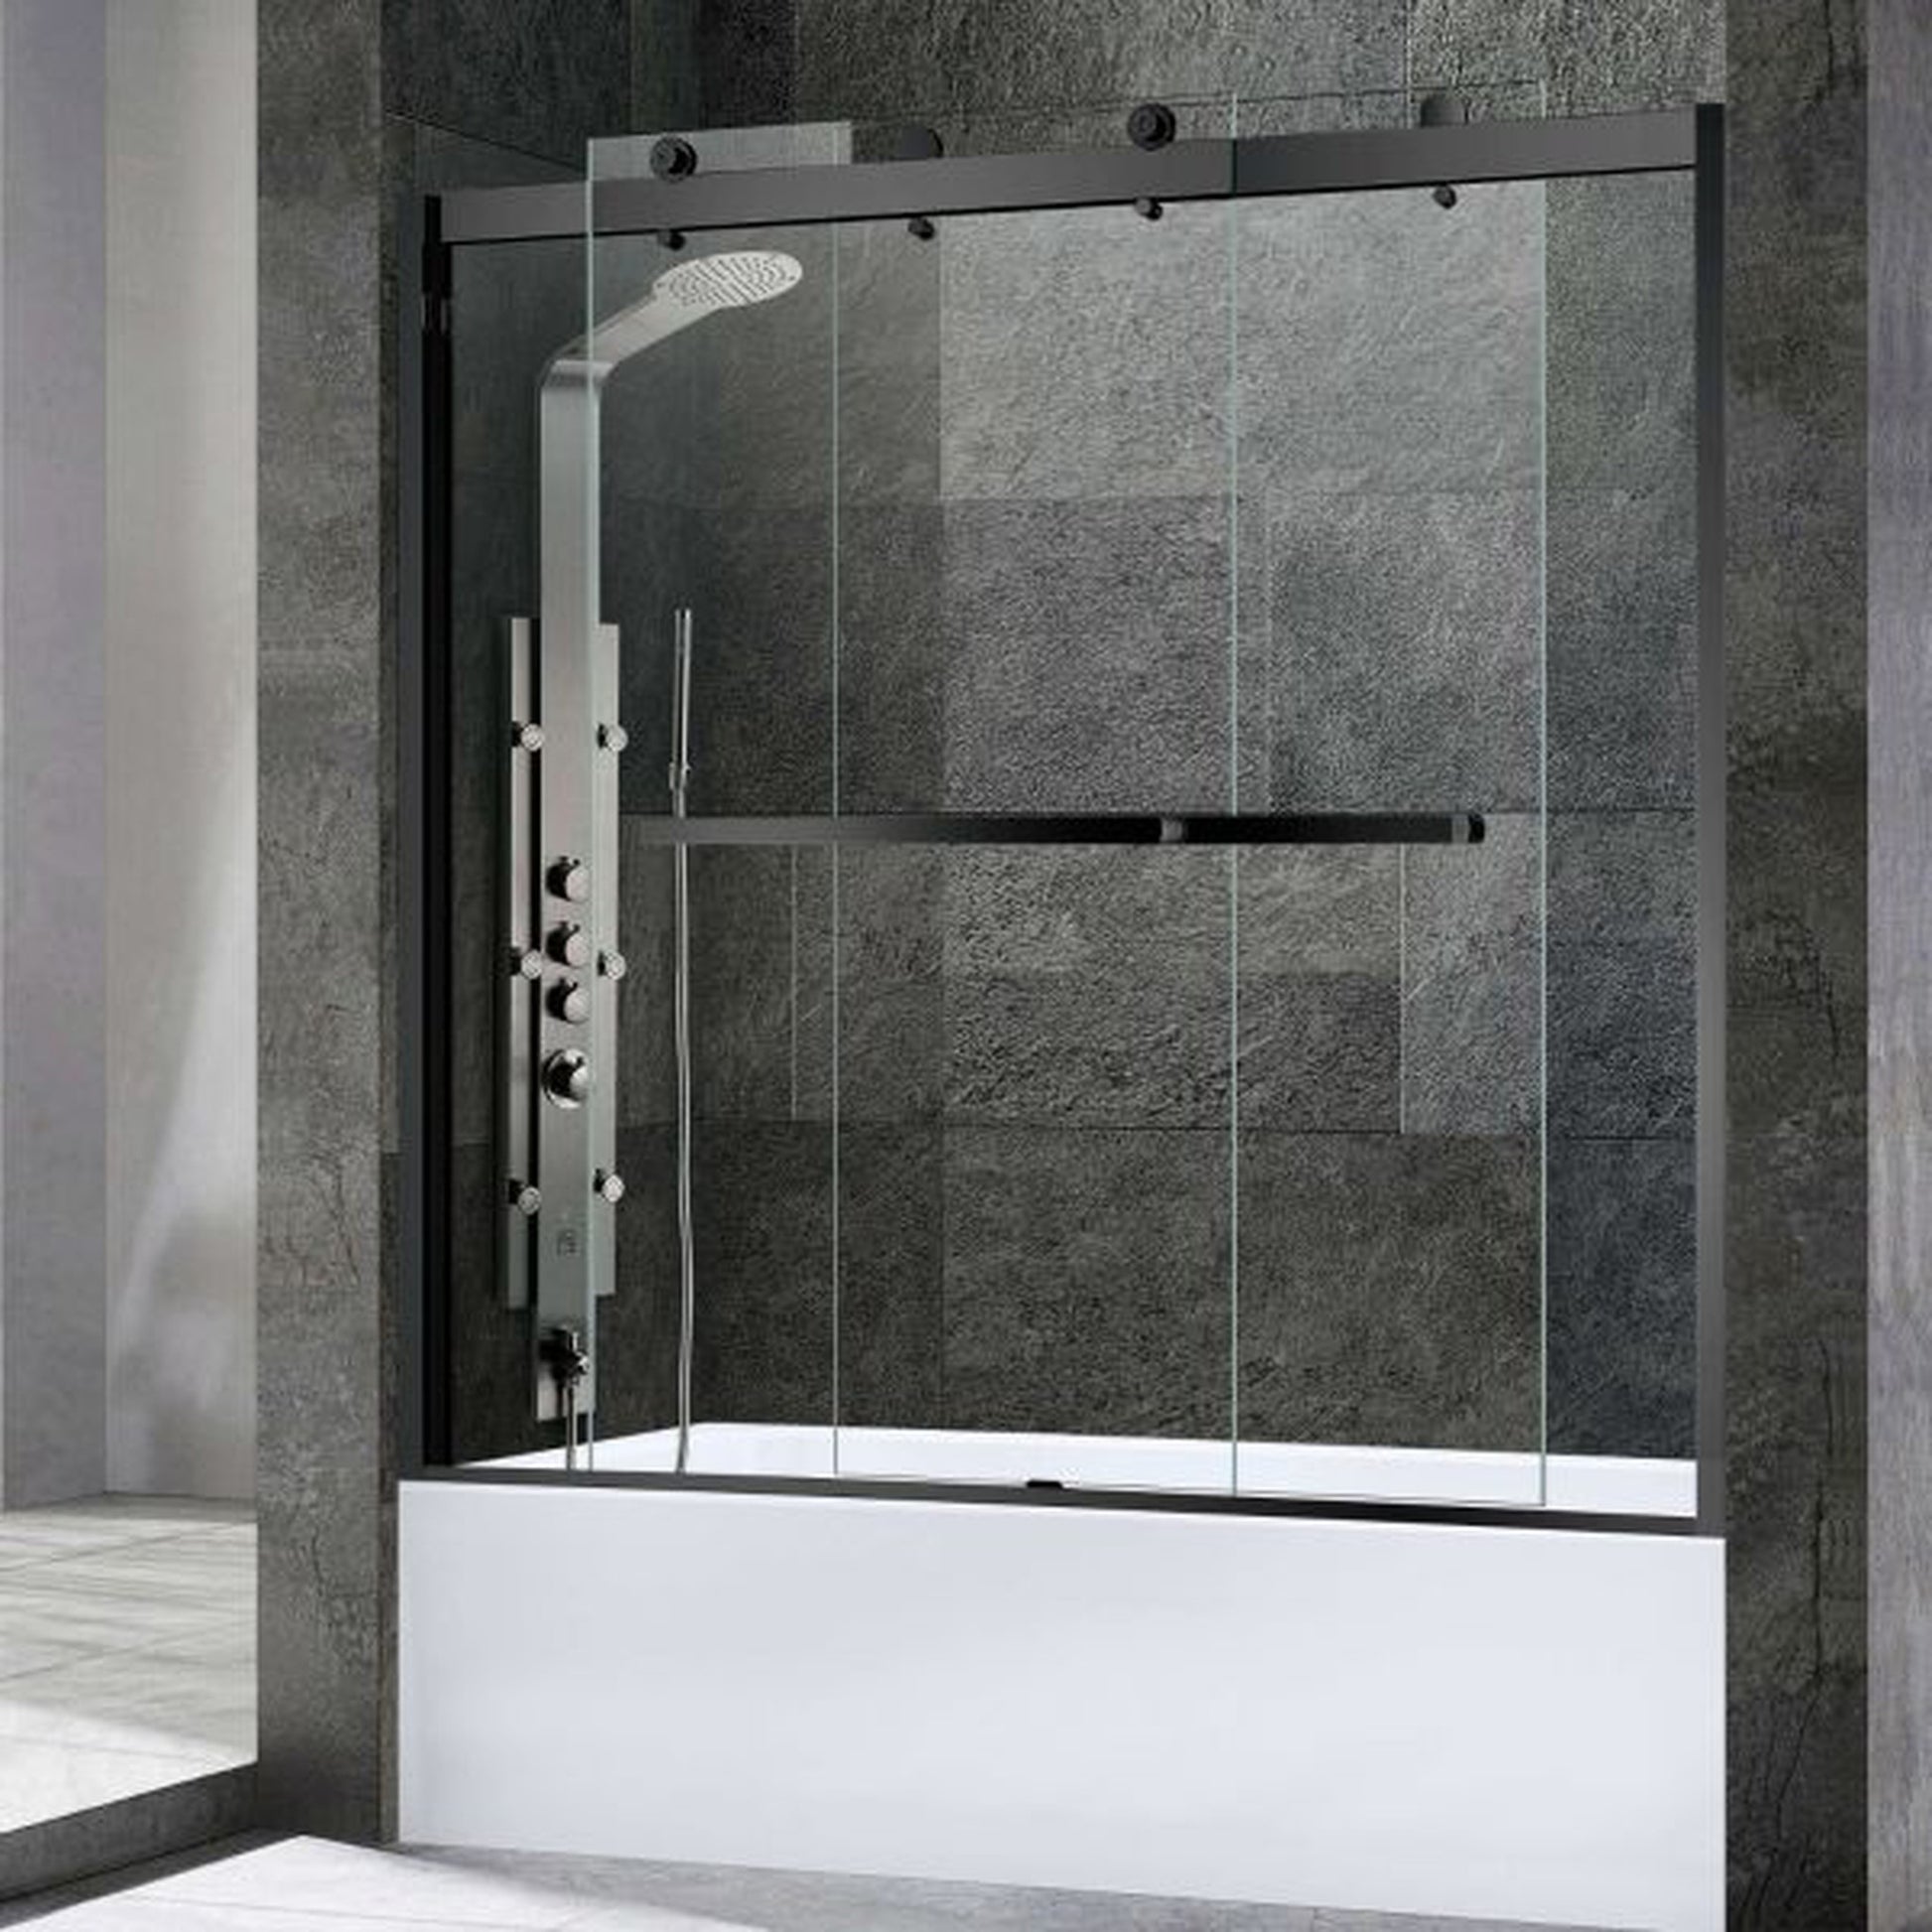 WoodBridge 60" W x 62" H Clear Tempered Glass 2-Way Opening and Double Sliding Frameless Shower Door With Matte Black Hardware Finish